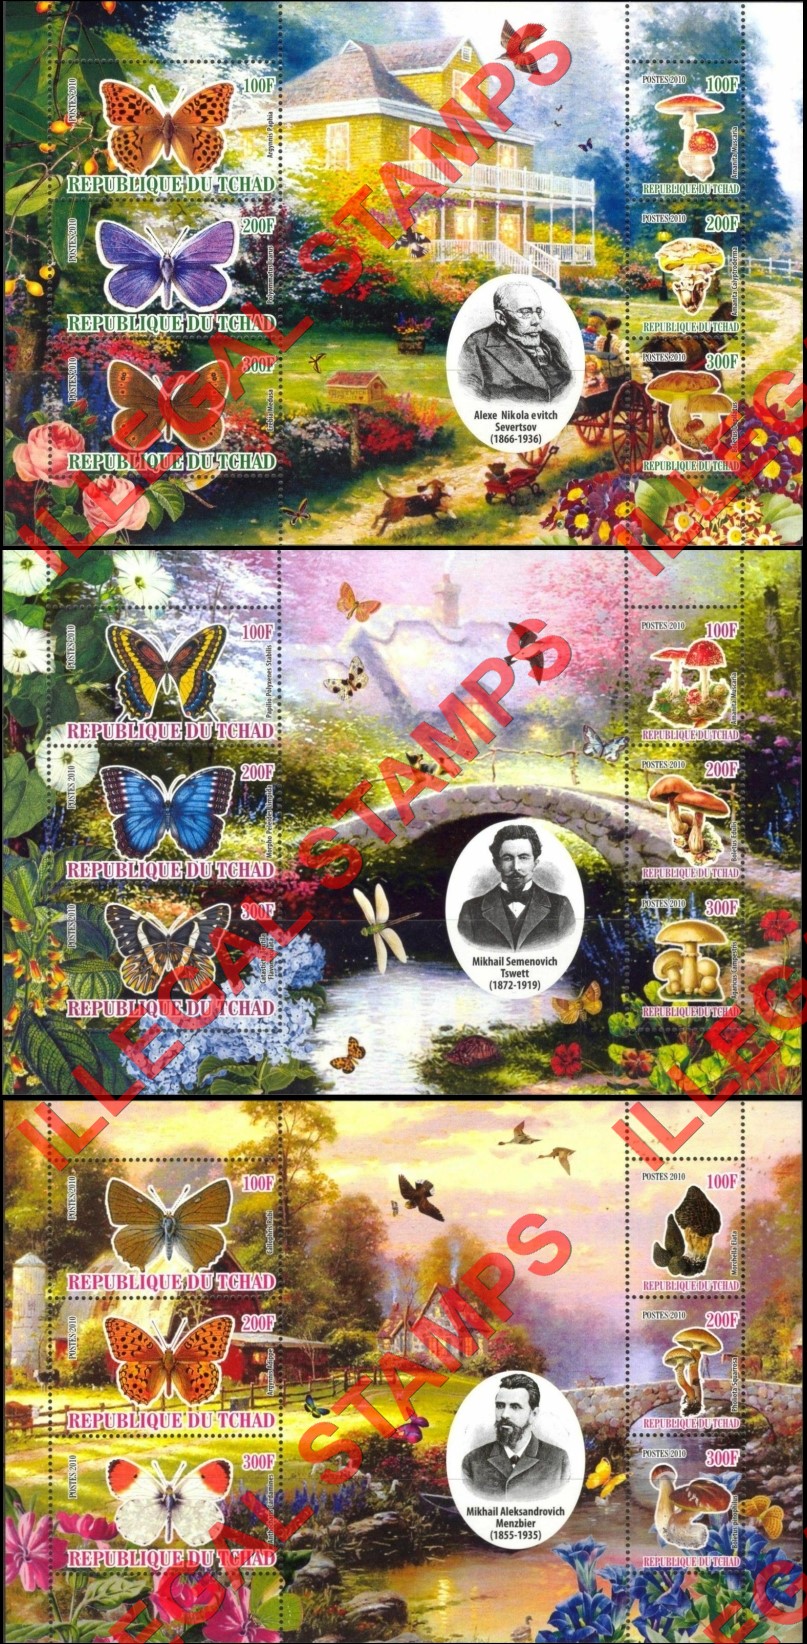 Chad 2010 Butterflies and Mushrooms Illegal Stamps in Souvenir Sheets of 6 (Part 1)